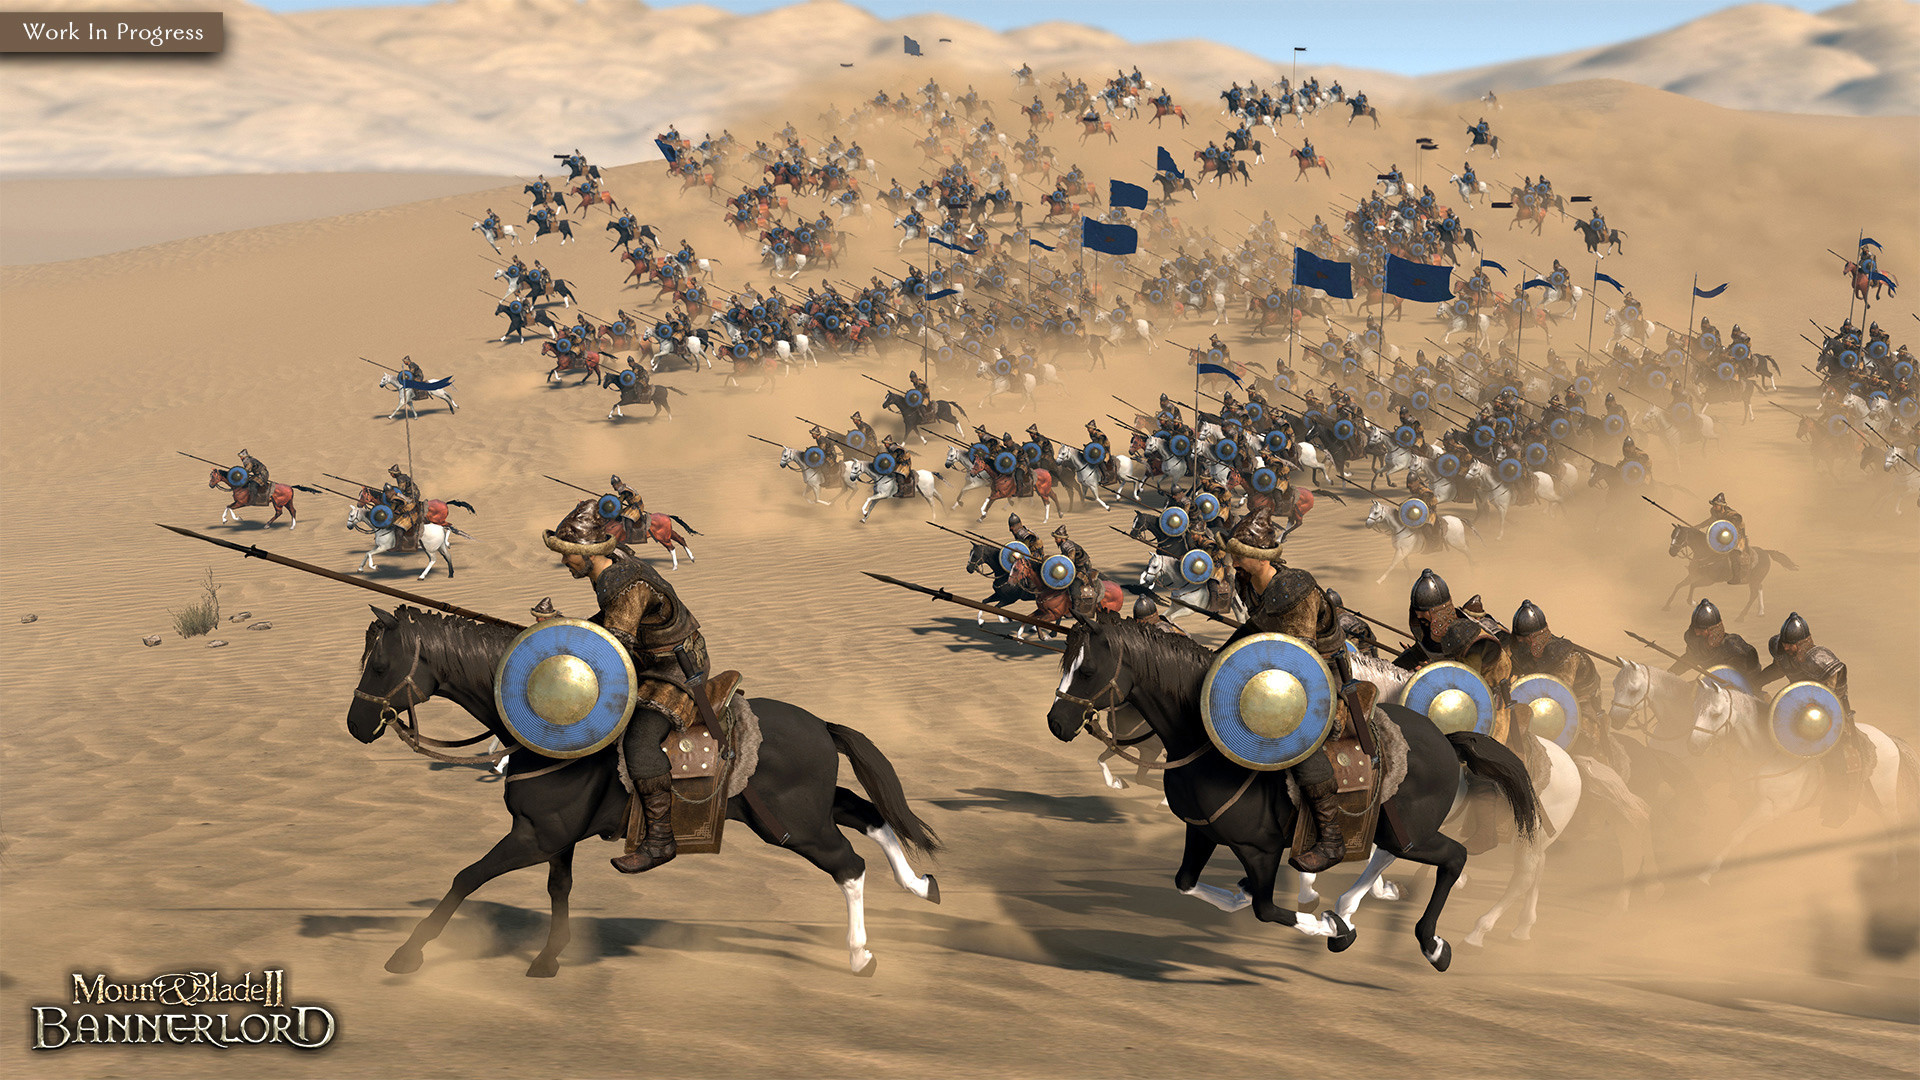 Find the best laptops for Mount & Blade II: Bannerlord